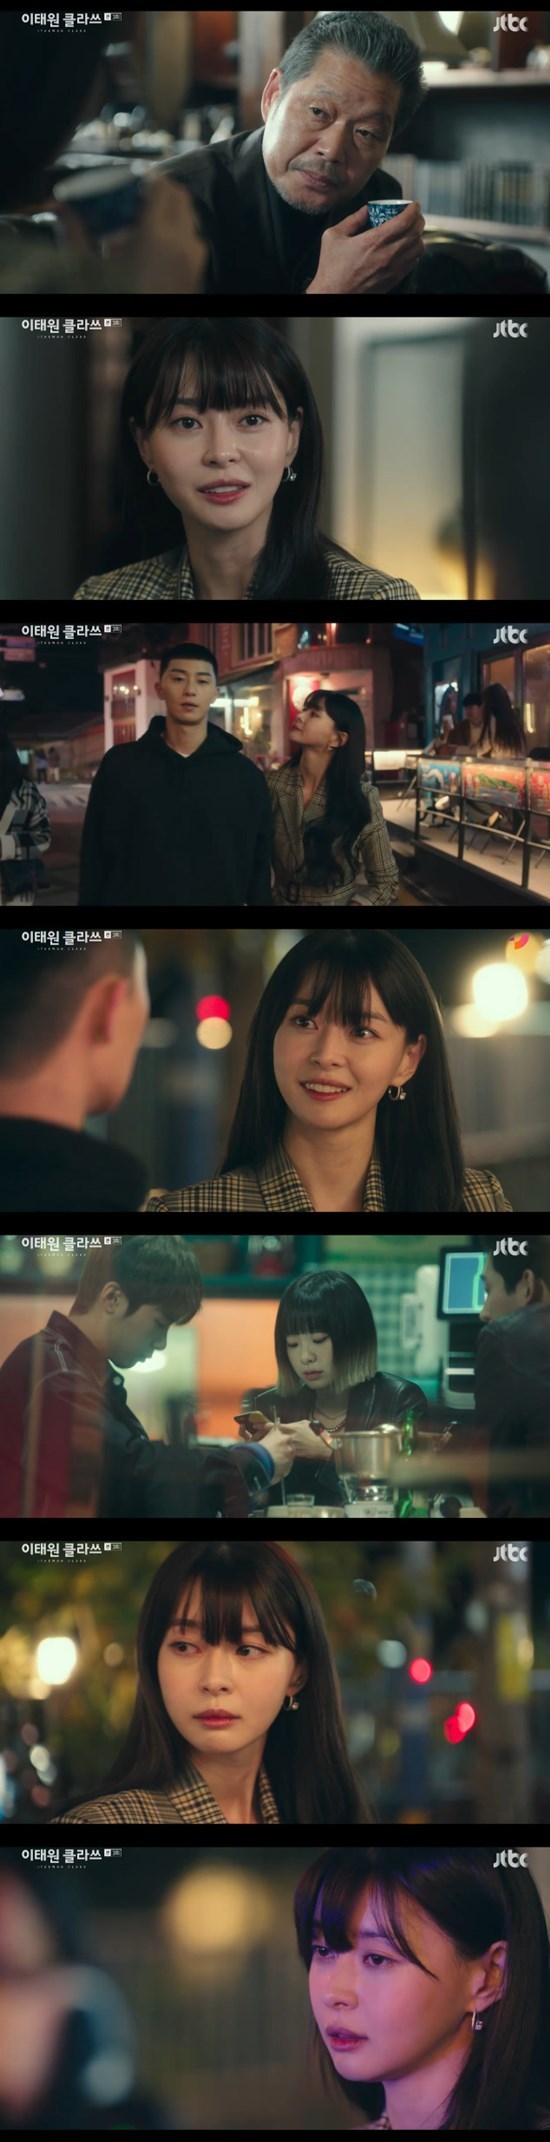 In the JTBC gilt drama Itaewon Klath (playplayplay by Cho Kwang-jin/director Kim Sung-yoon), which was broadcast on the afternoon of the 7th, Oh Soo-ah (Kwon Nara) who is active in the Jangga was portrayed.Oh Soo-ah, who has gained the trust of Jang Dae-hee (Yoo Jae-myung), was a competent employee at the Changga, meeting with the opinions of Chang (the Fountainhead).Jang Dae-hee called Oh Soo-ah and talked to him, saying, My son had Park die in a hit-and-run. He said, I did not mind that Jang (Anbo Hyun) is the real culprit of a hit-and-run accident.Oh Soo-ah was embarrassed but could not express his words.Jang Dae-hee then mentioned the fact that Park Seo-joon (Park Seo-joon) opened Sweet Night near the Changa Foa Itaewon retail store.Oh Soo-ah replied, Sales are also in the red, and the chairman is not enough to care.Then Jang Dae-hee asked, What if the same situation happened 10 years ago? Who will I choose between Roy and me?Oh Soo-ah referred to himself as a long-time man and showed a line with Roy, and Jang Dae-hee laughed as if he were satisfied with Oh Soo-ah.Then, Roy and Oh Soo-ah came across each other looking around for answers to their shops.Oh Soo-ah told Park that he could see it in the line he knew if he showed the settlement, saying, There may be The Hole that is not necessary for expenditure. Park said, There is no The Hole that is not necessary for expenditure.But Park was embarrassed, revealing her still-loving affection for Oh Soo-ah.At that time, Oh Soo-ah witnessed a group of Joyser (Kim Dae-mi) who was drinking at Sanbam.Joyser was already denied access to a minor in Foa, a long-term house managed by Oh Soo-ah.In the end, Oh Soo-ah reported short night to the police, and short night of Park Roy was put on a crisis of business suspension.Oh Soo-ah said, I have changed quite a lot, but I wondered what the real inside was.On the other hand, JTBC Itaewon Clath is a drama depicting the founding myth of youth who pursue freedom with their own values ​​in an unreasonable world.It is broadcast every Friday and Saturday at 10:50 pm.